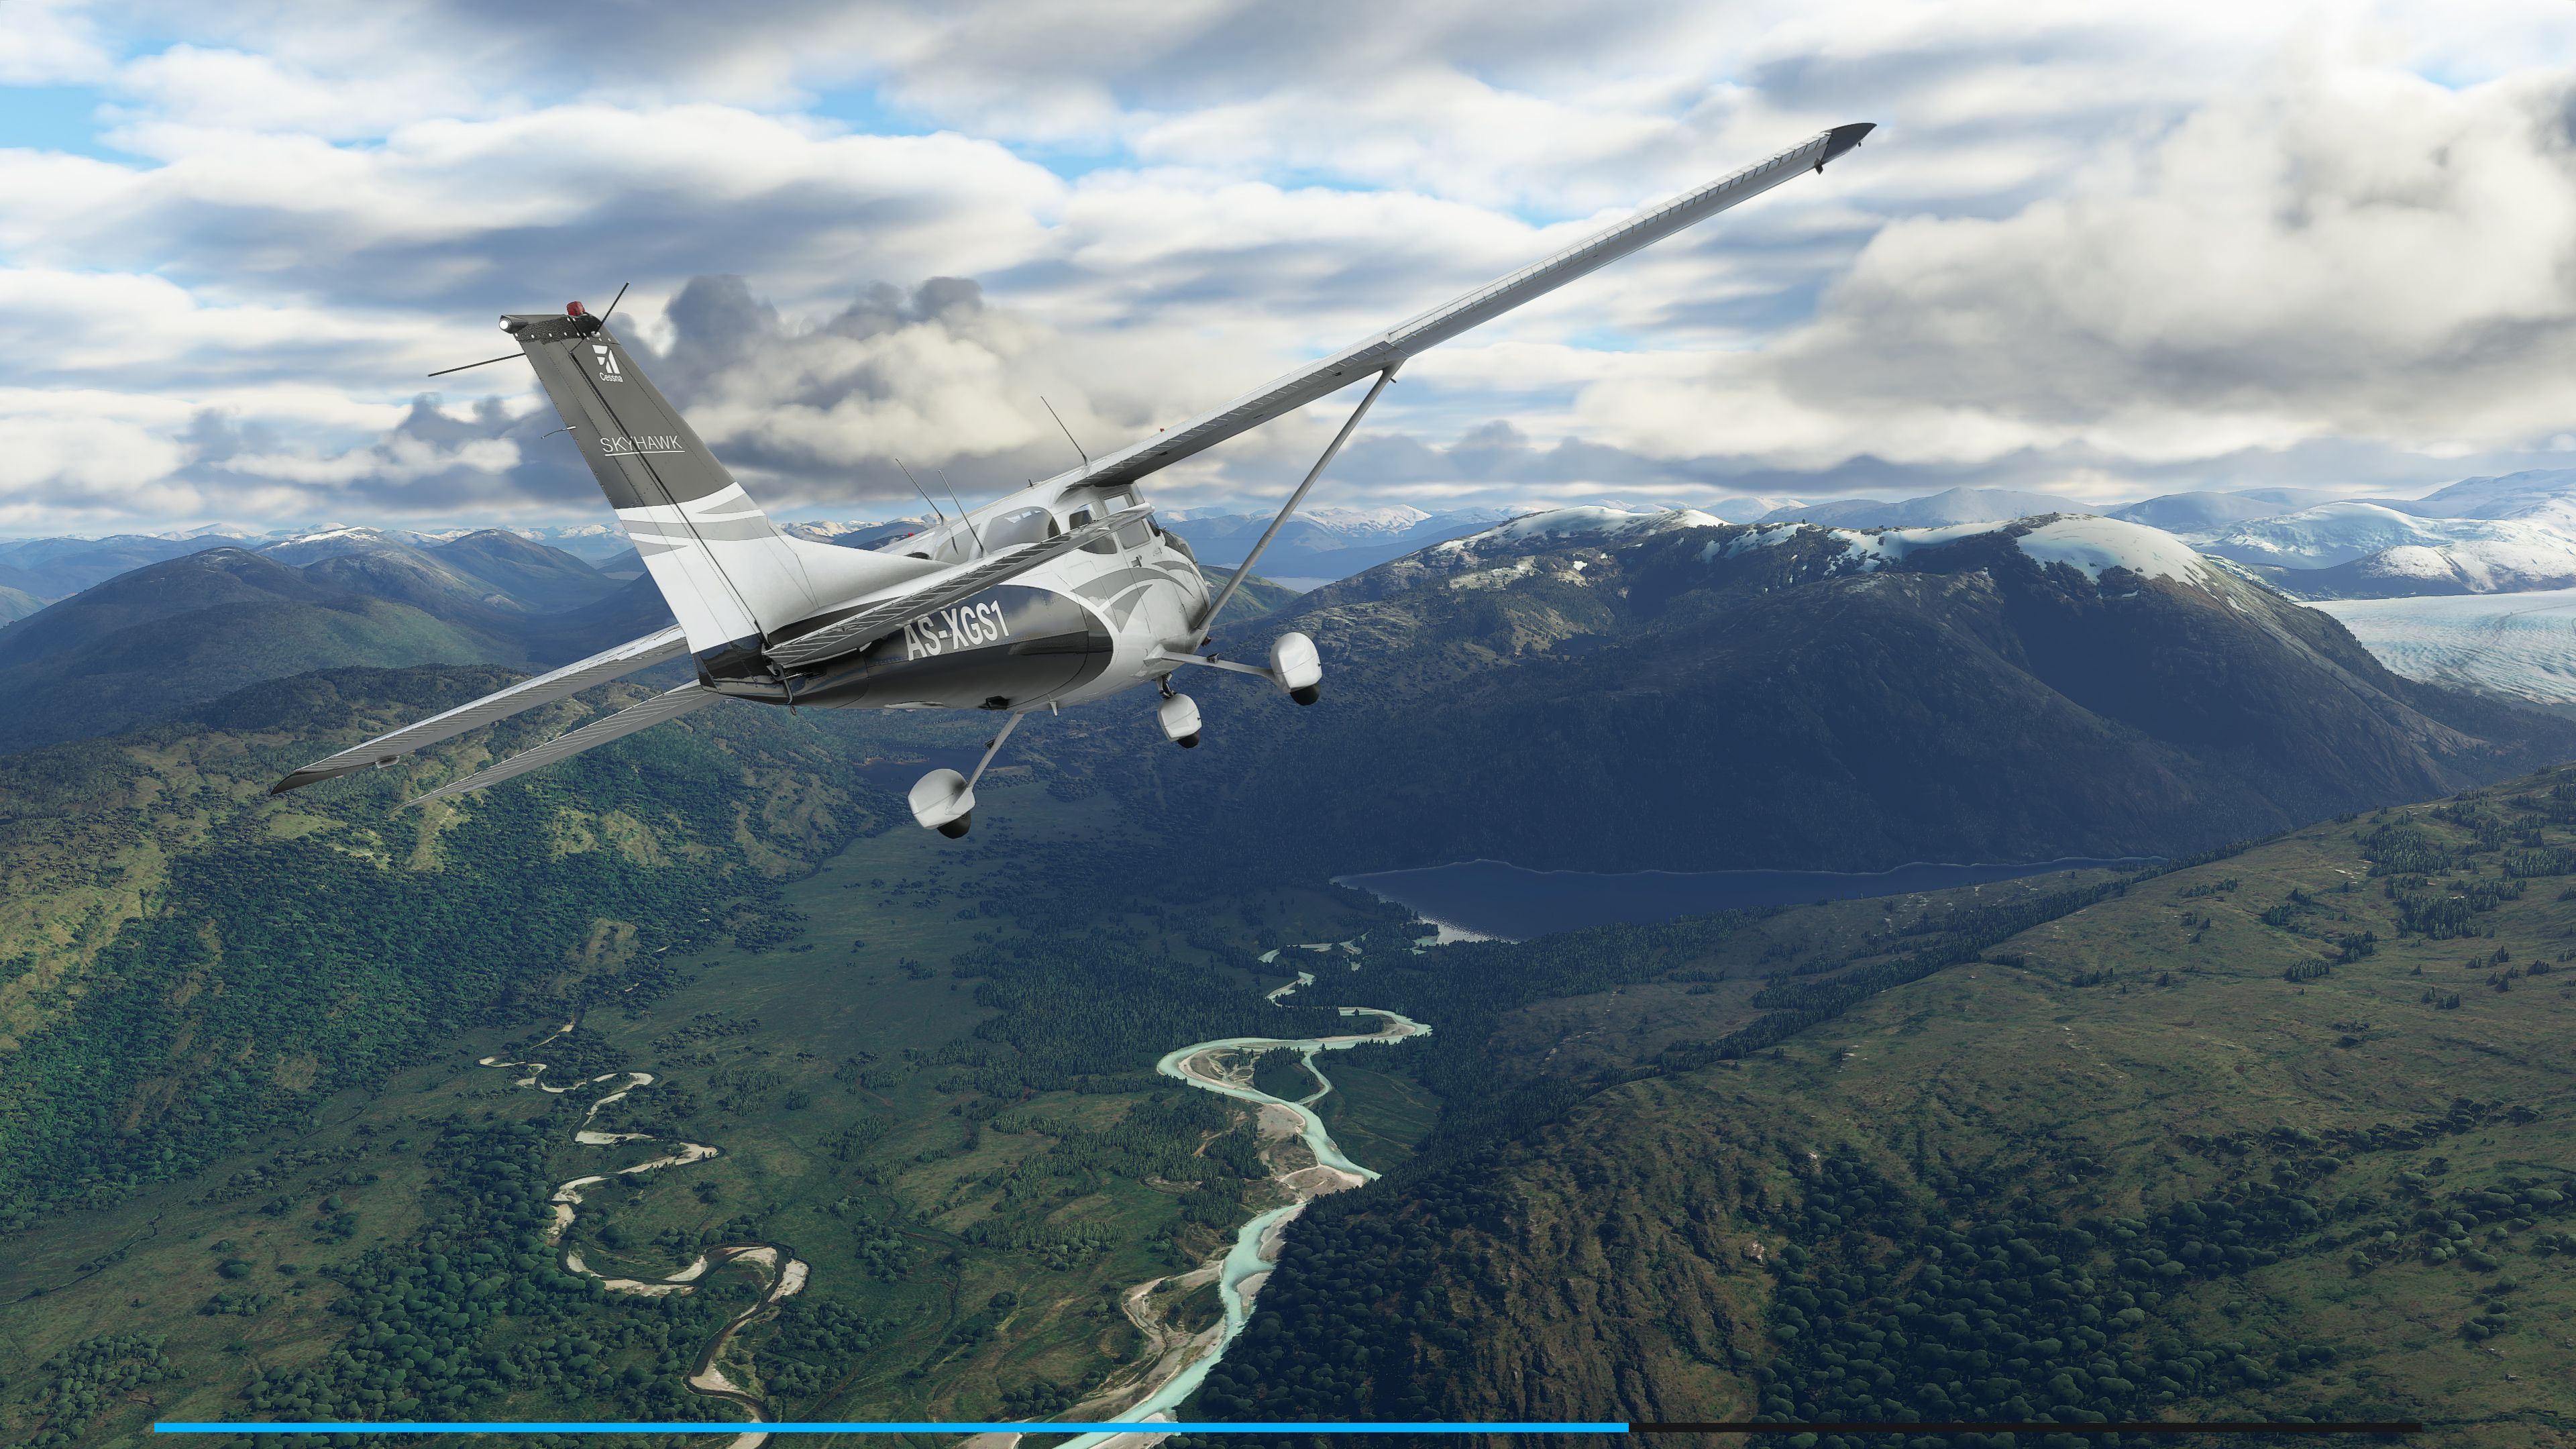 Microsoft Flight Simulator 2020  How to Download and Install